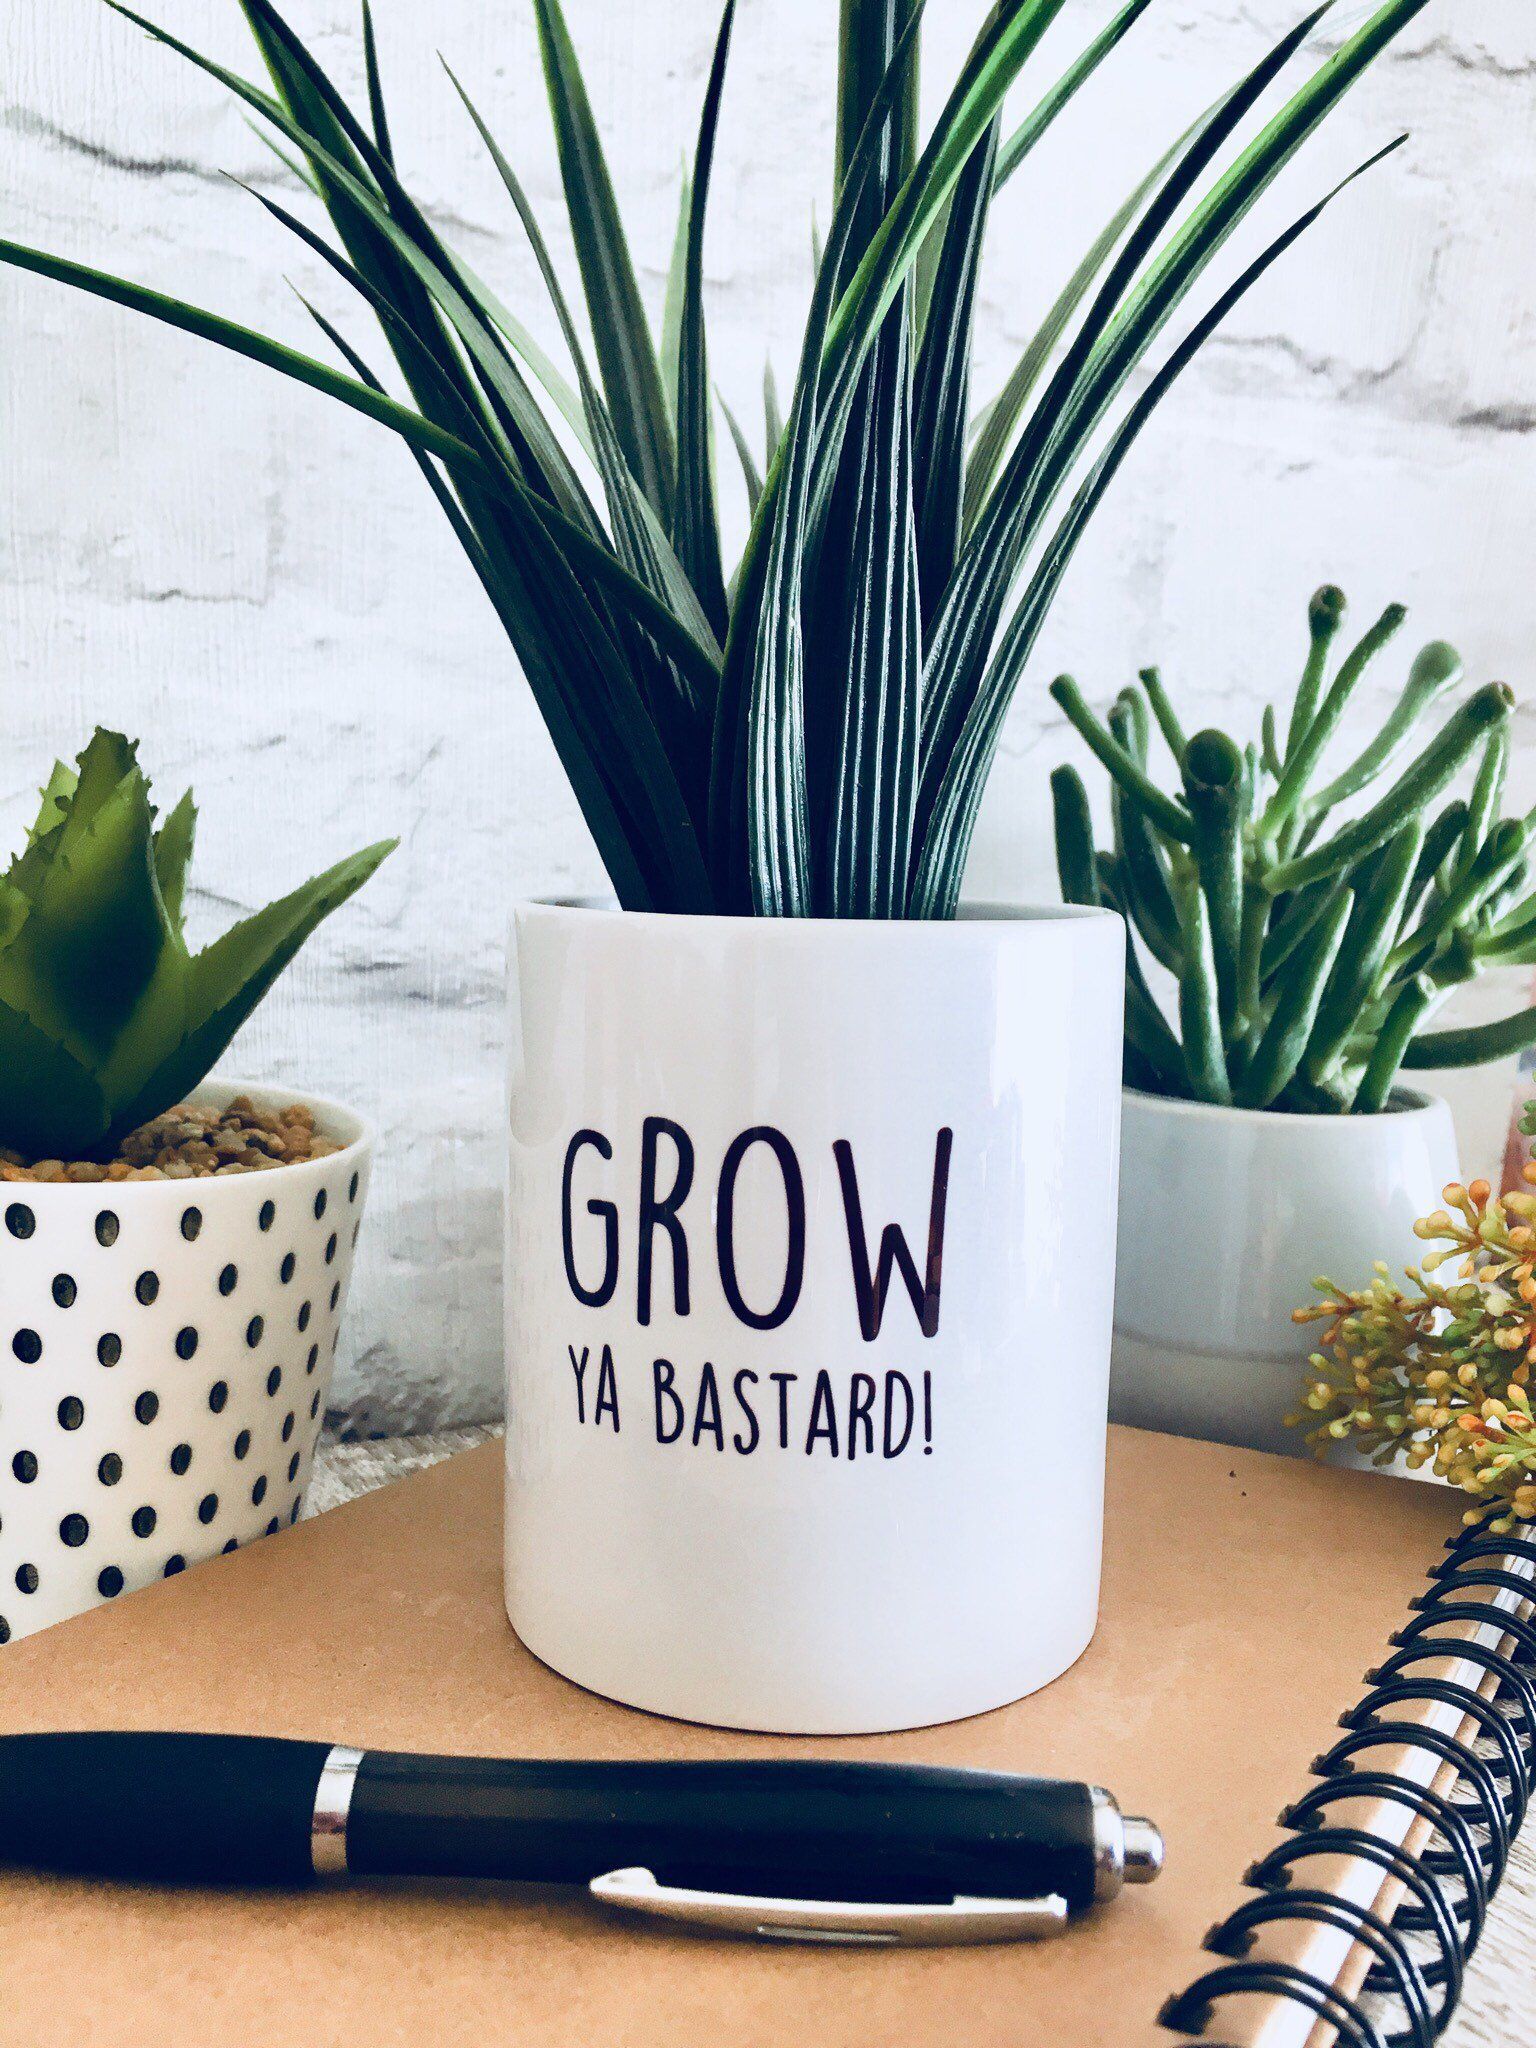 Plant pot, planter, cactus pot, Rude gift, gift for women, funny plant pot, gift for her, friend birthday gift, swear, funny gift for friend -   11 funny plants Potted ideas